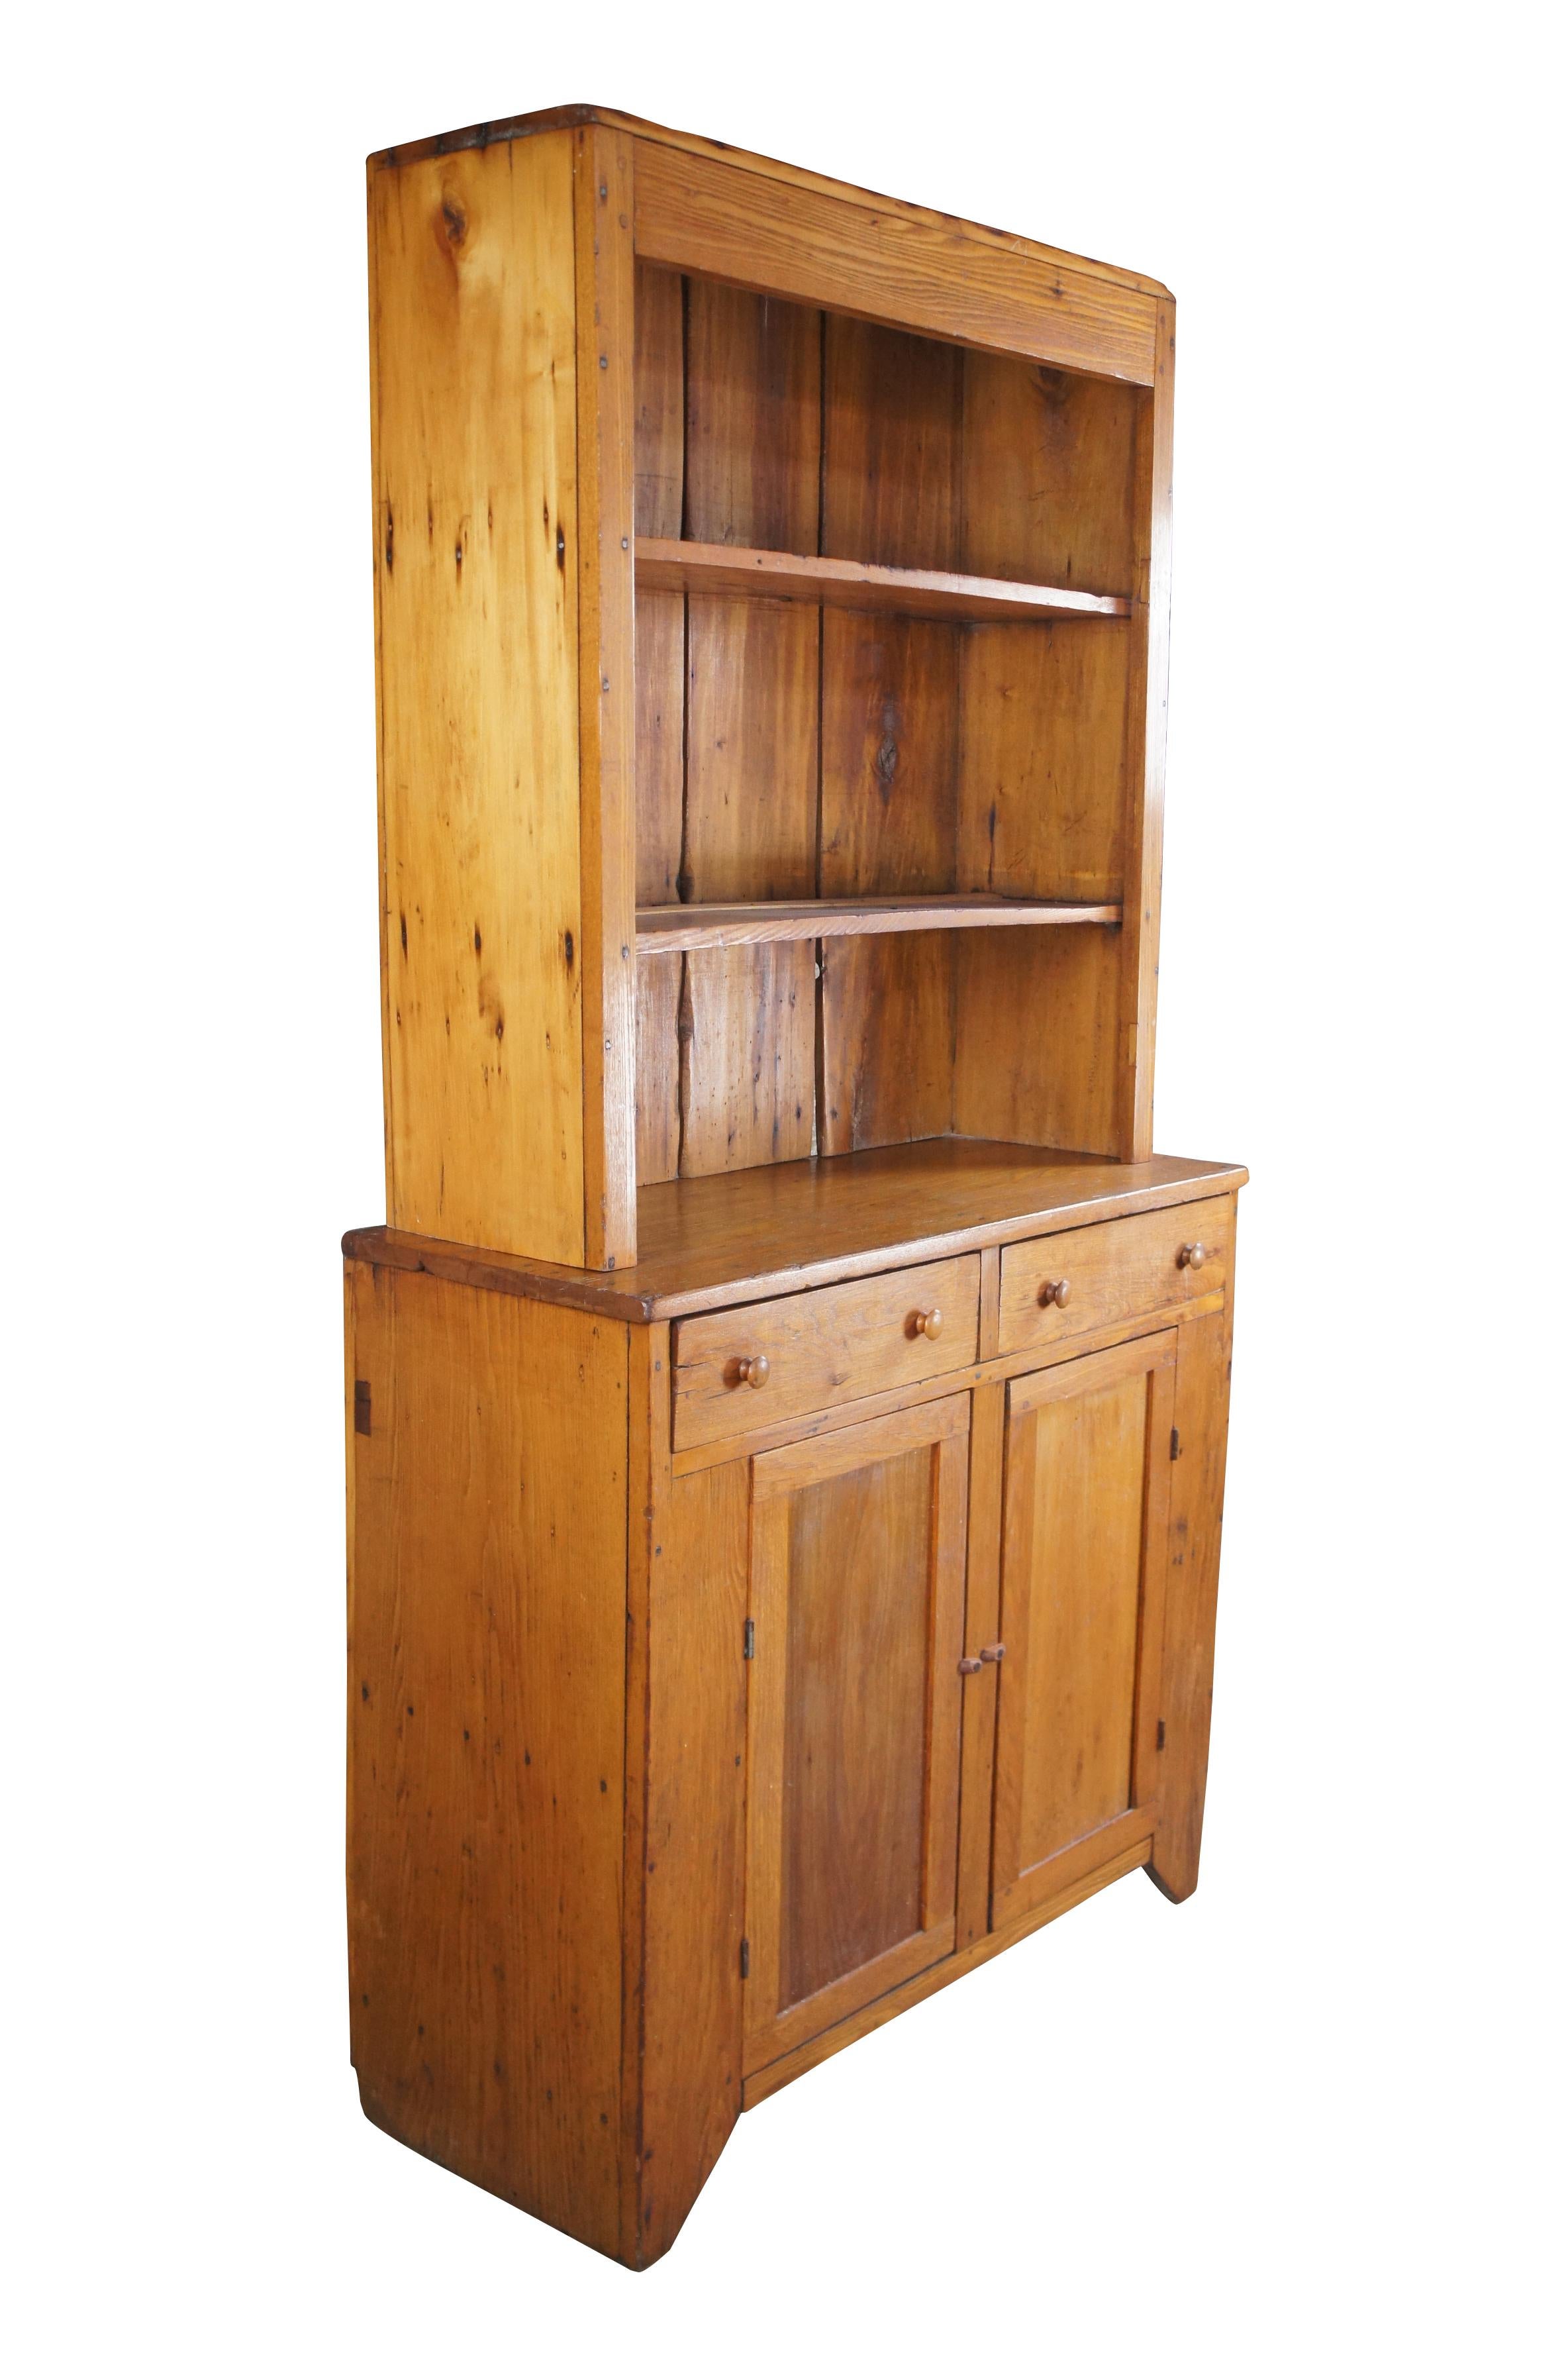 Early 19th century American Primitive pewter hutch or china cupboard. 2 piece design made from oak with two shelves along the top. The base has two hand dovetailed drawers over a lower two door latched cabinet with shelf. Made using handcut nails